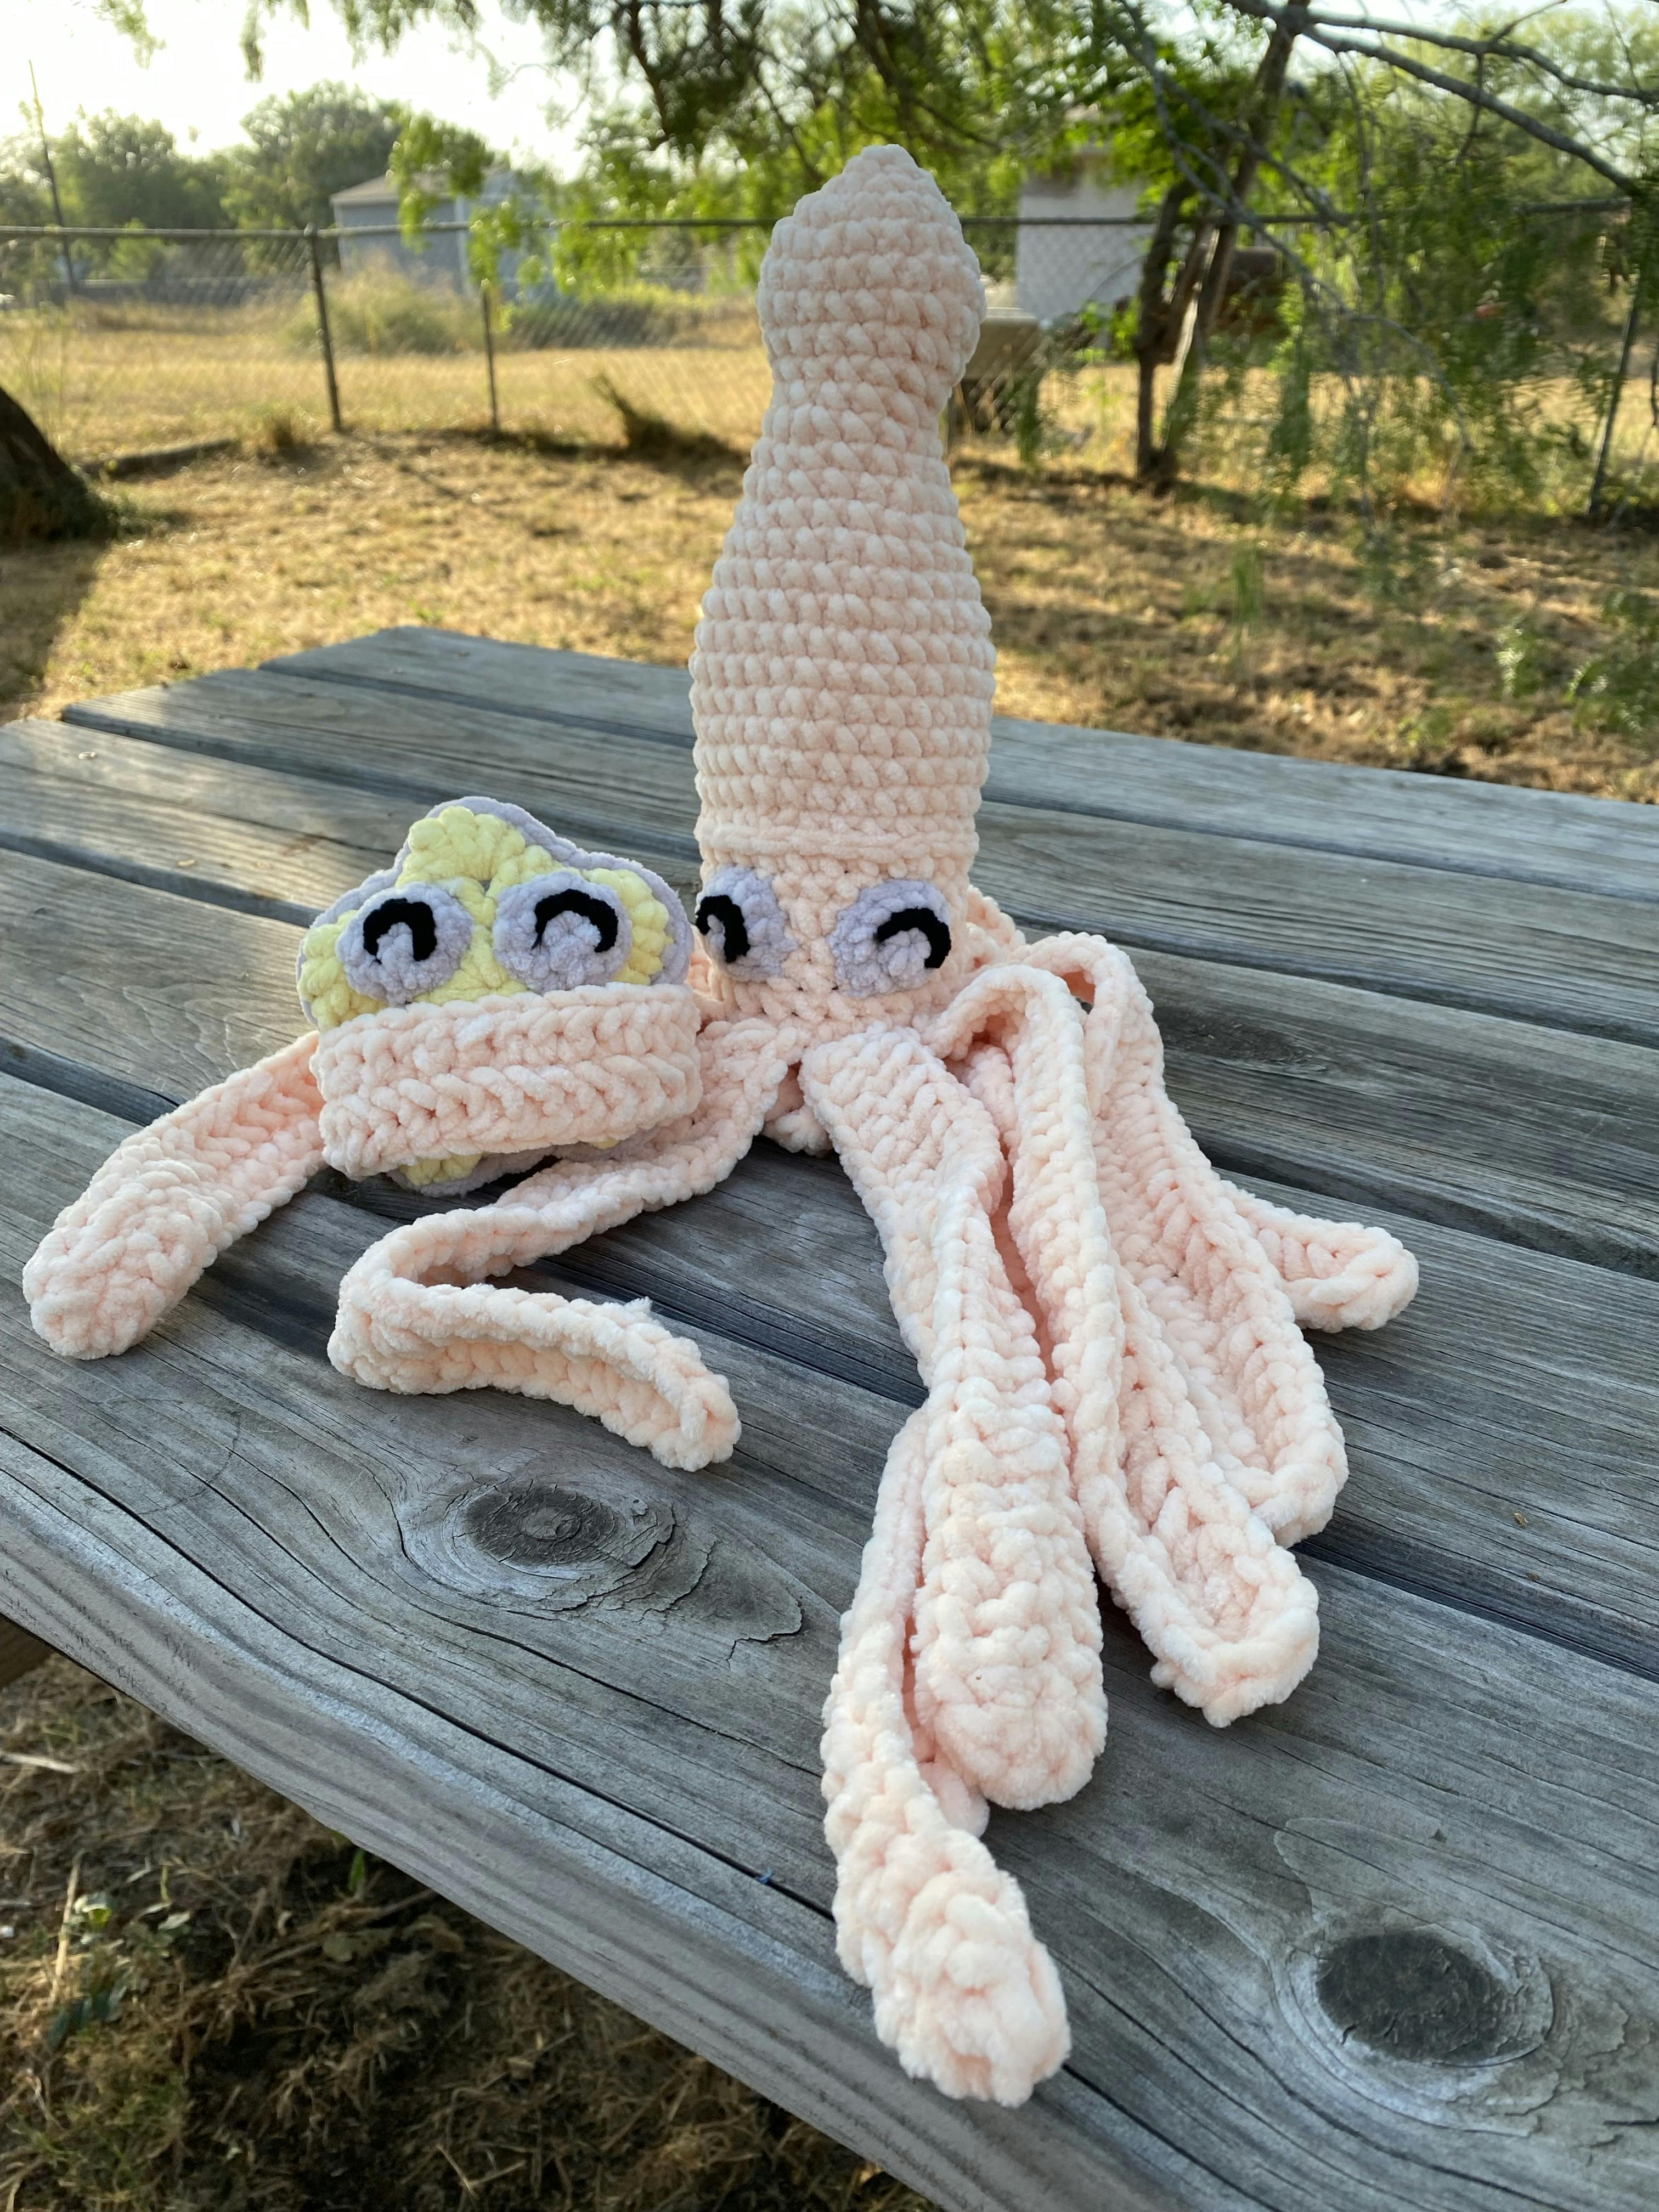 “Giant” Squid and Buddy!